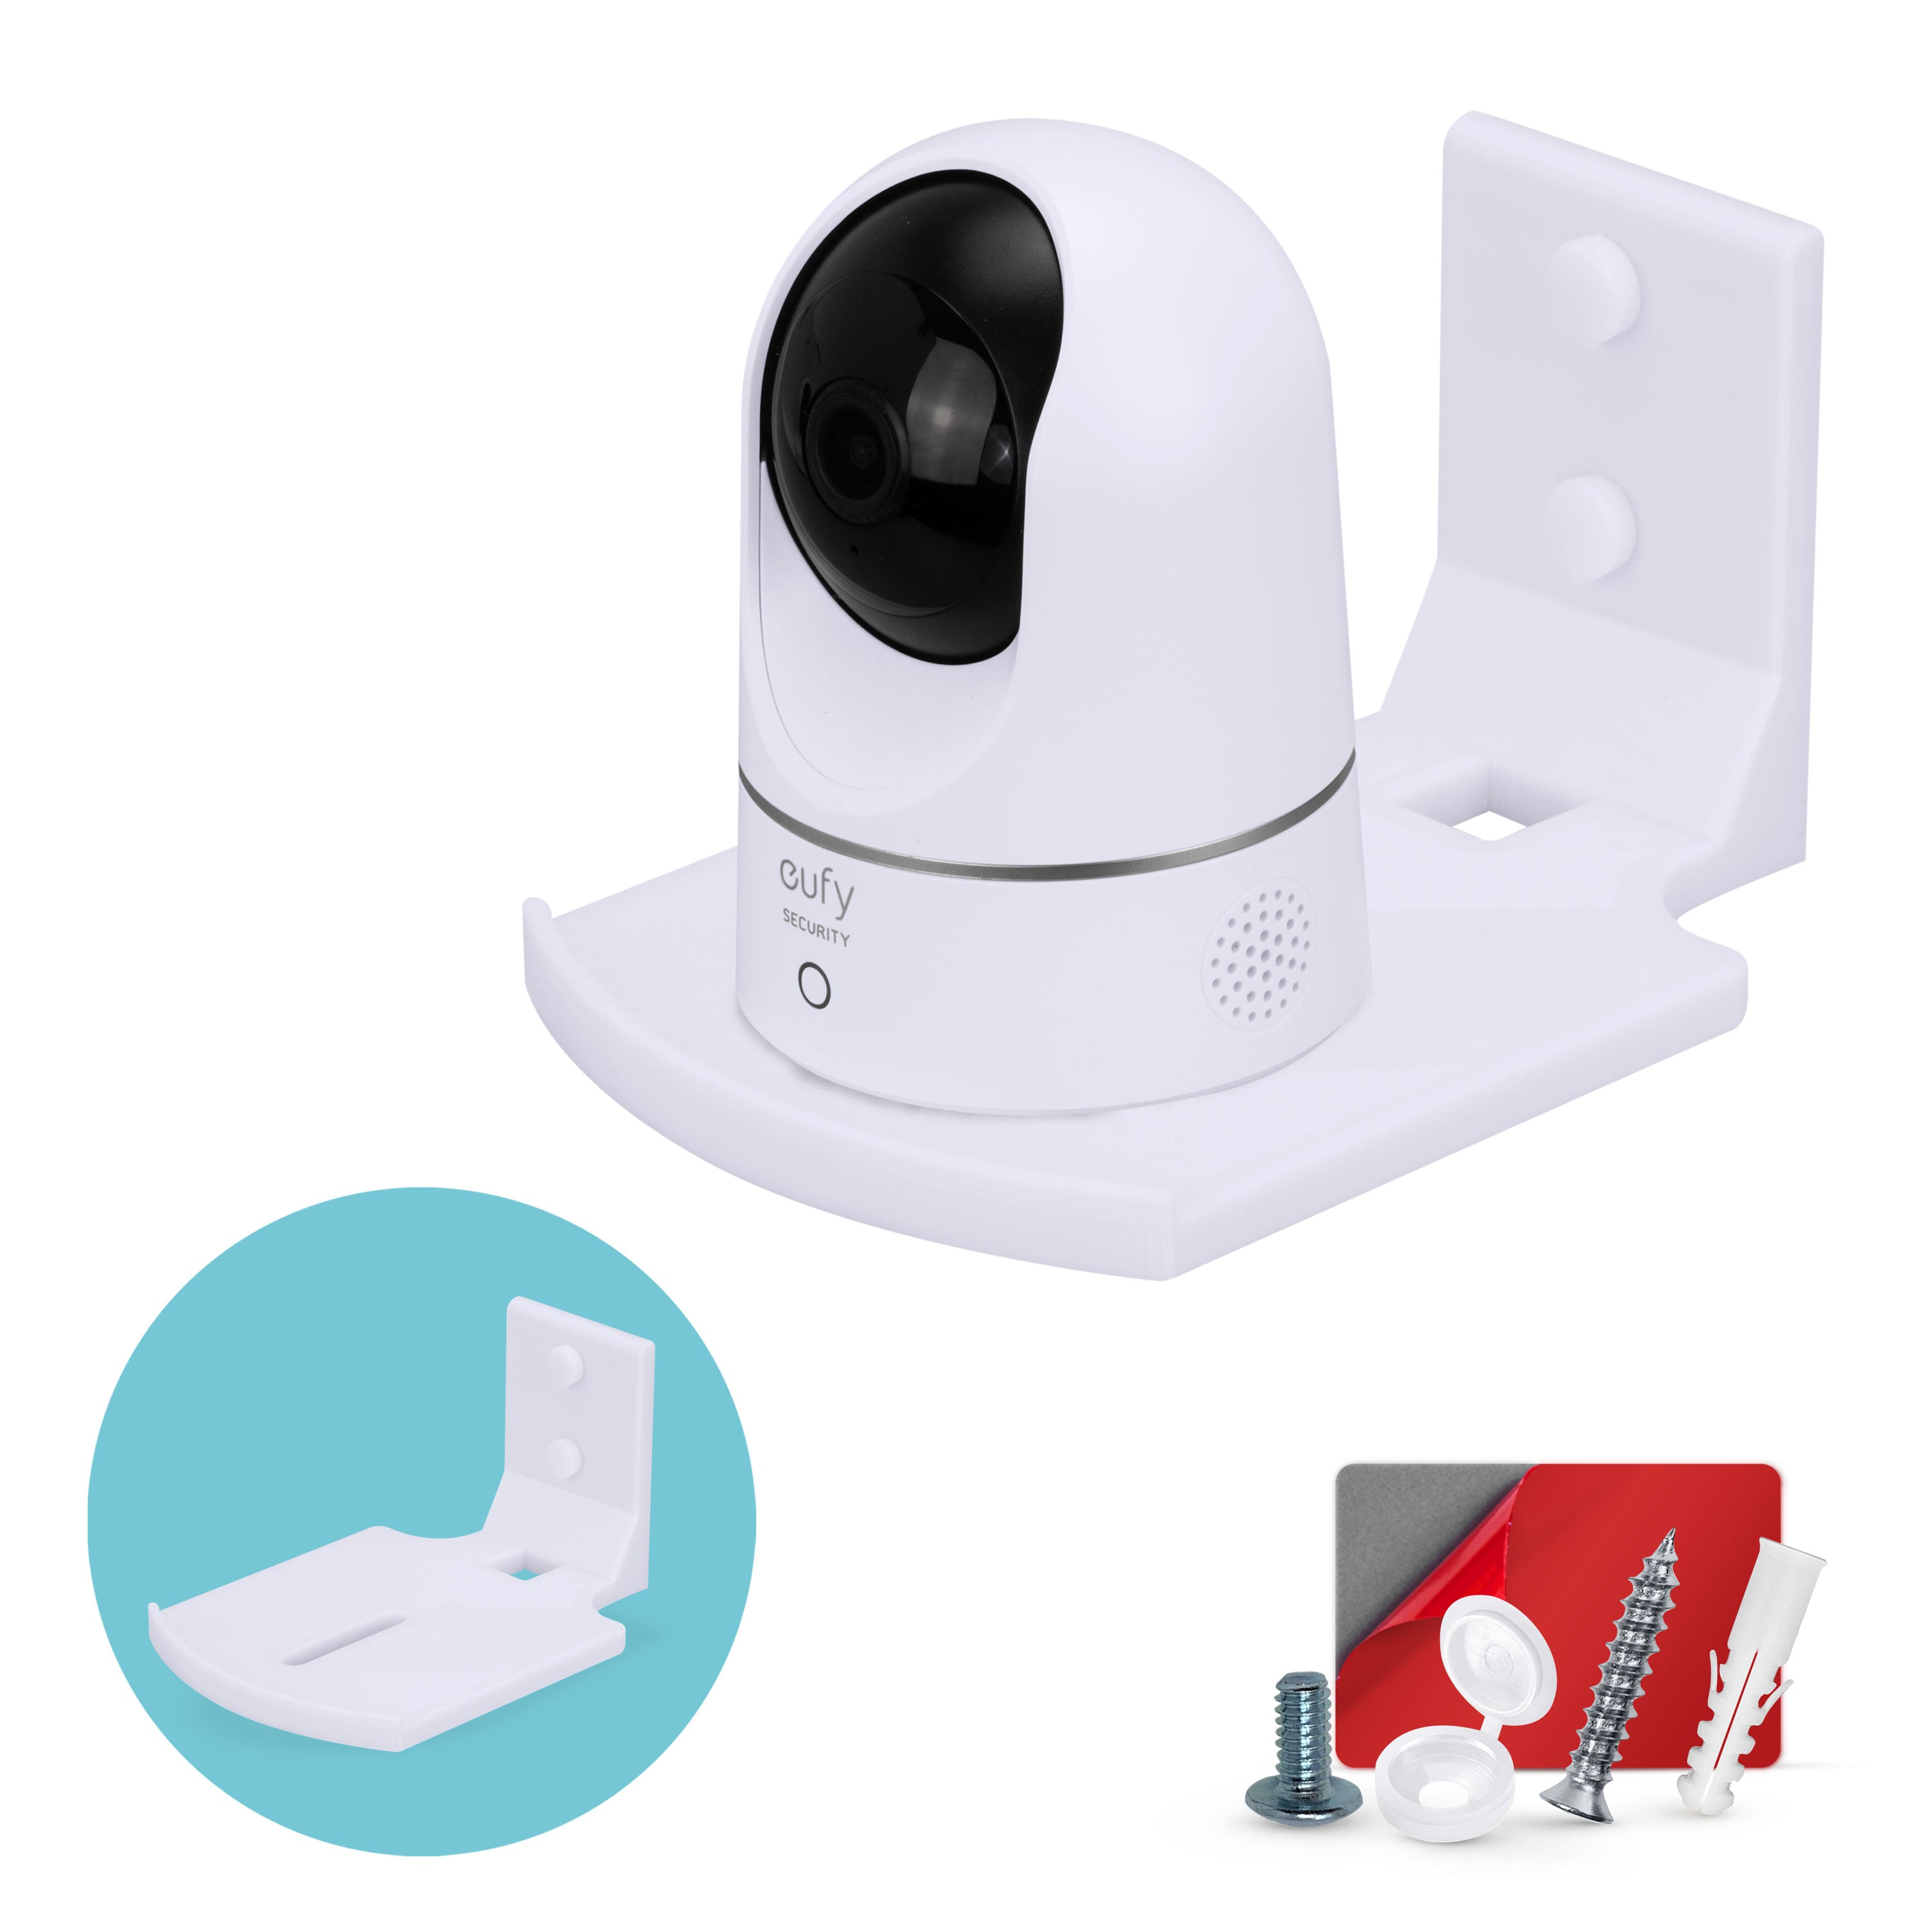 How Do I Connect Wansview Camera To My Wifi ?